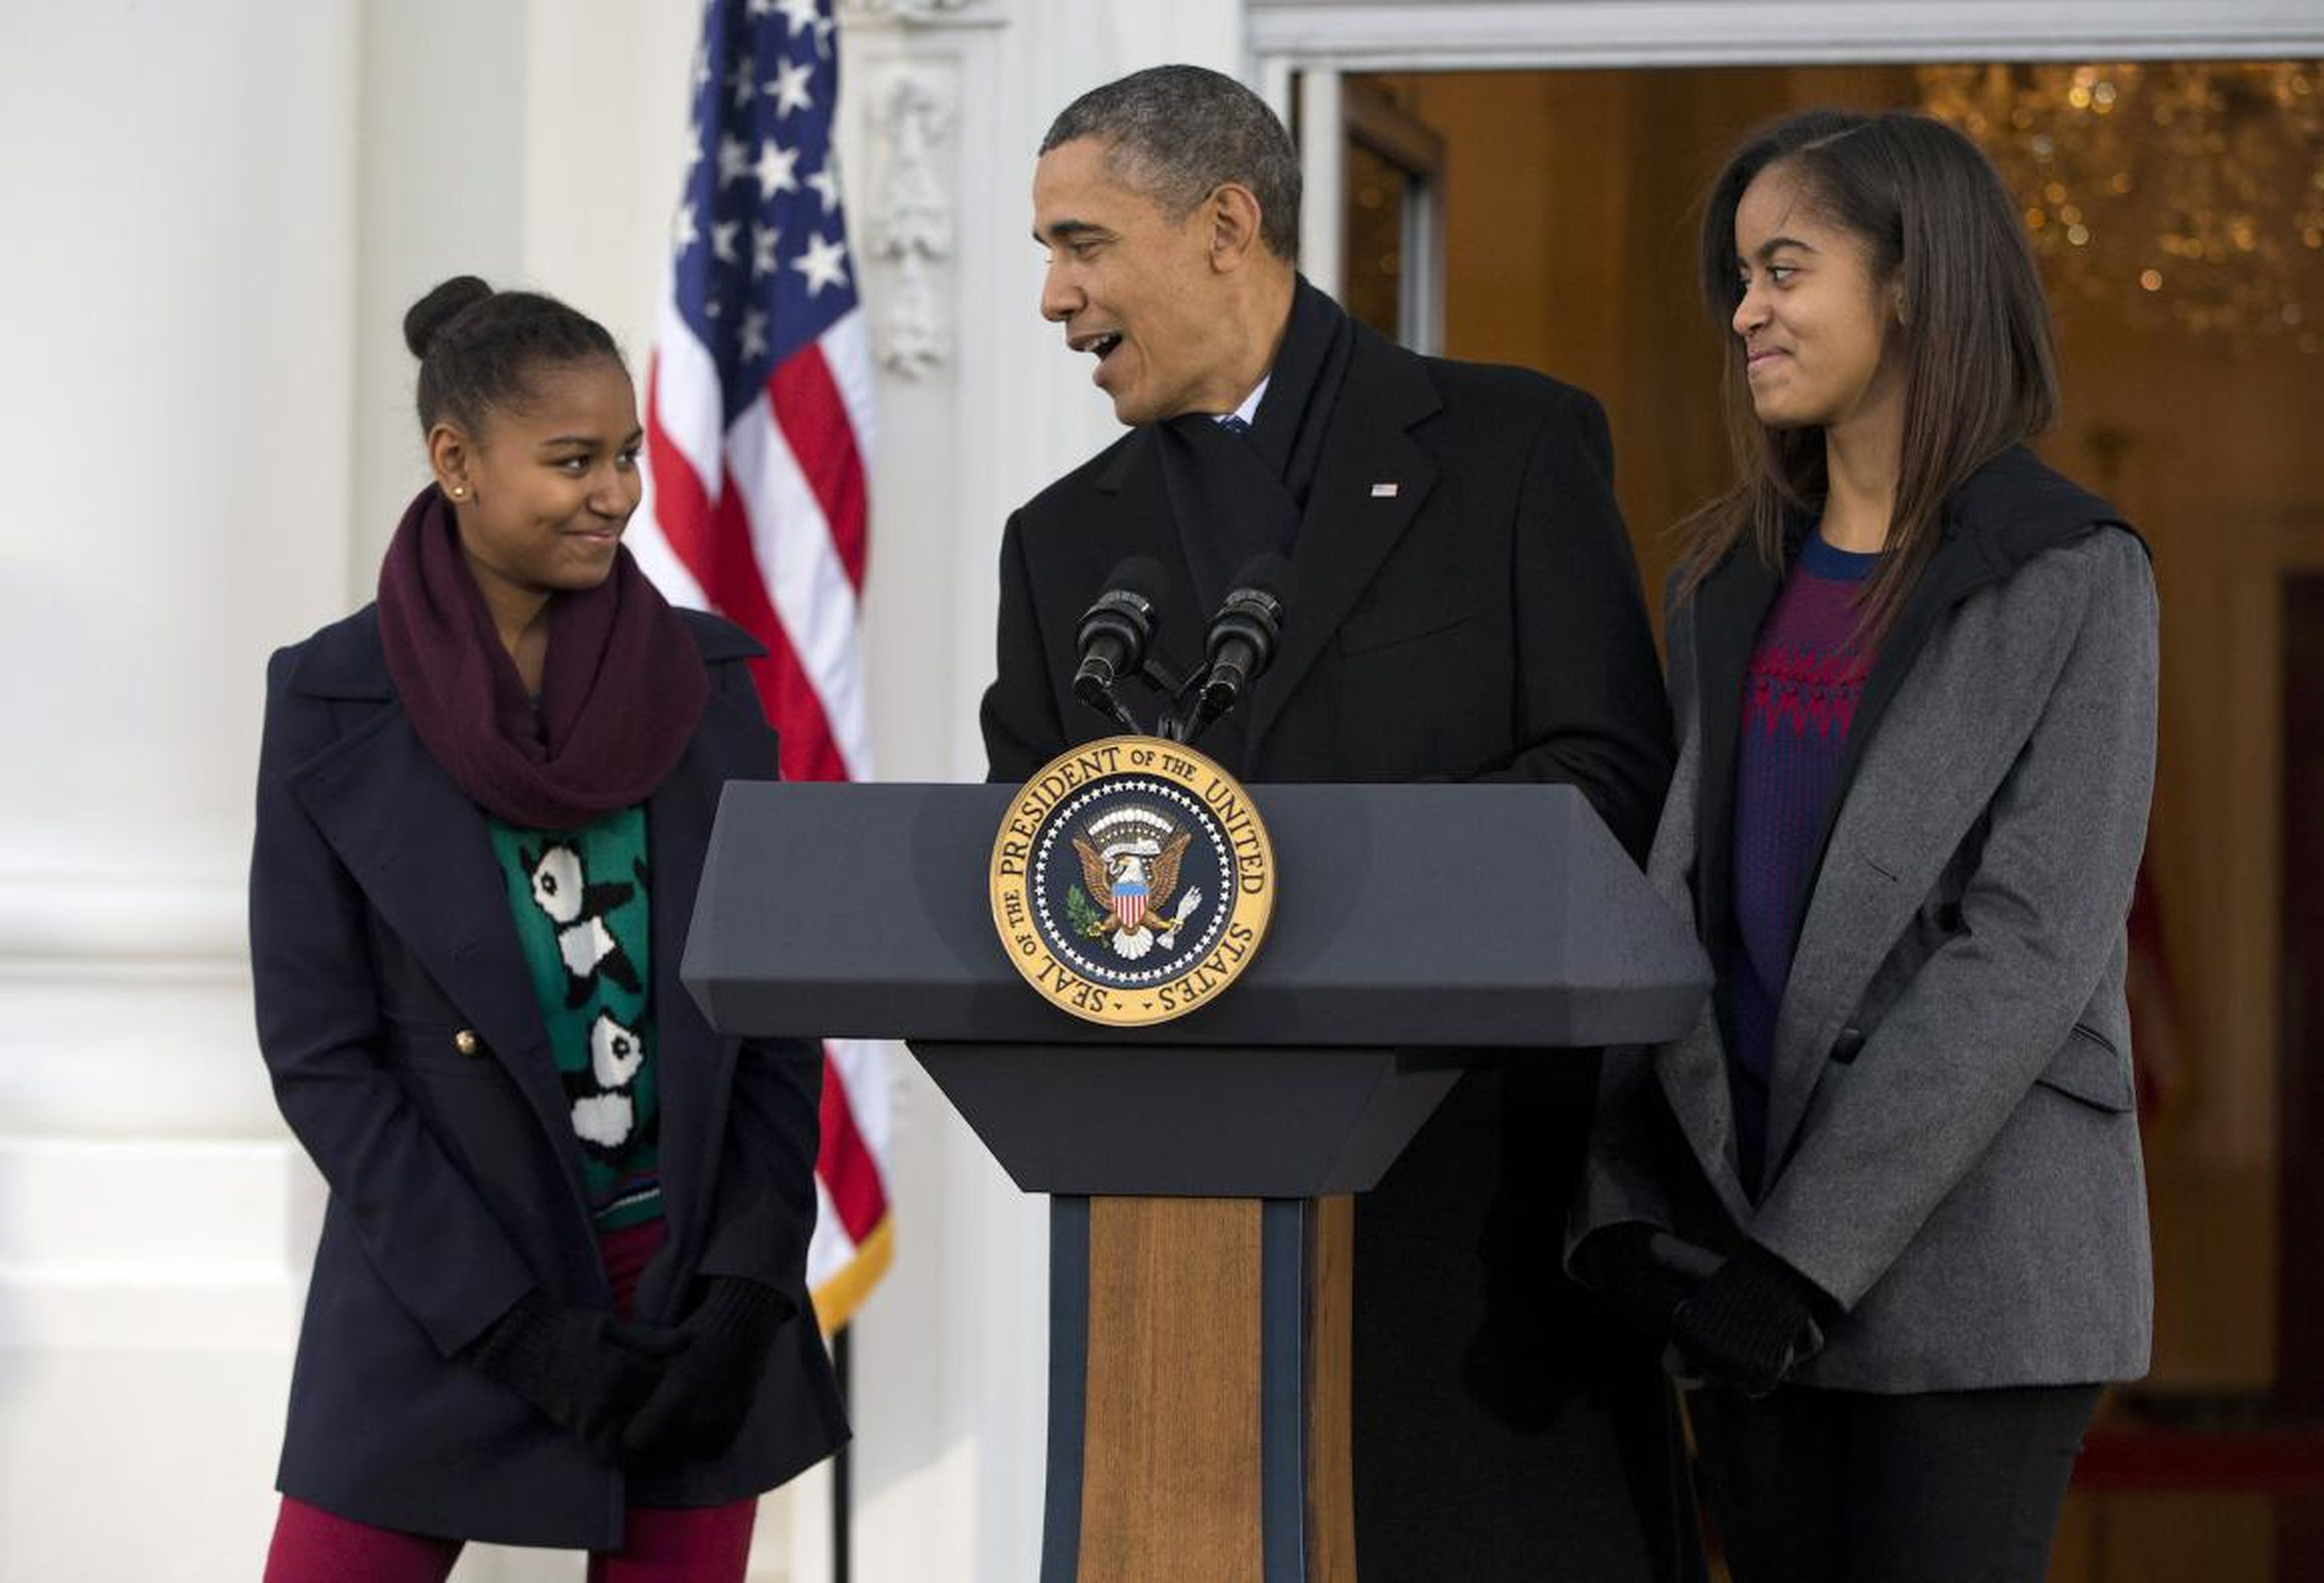 The president, seen with his daughters, made a joke during remarks in November 2013 for the Thanksgiving tradition of saving a turkey from the dinner table with a "presidential pardon."